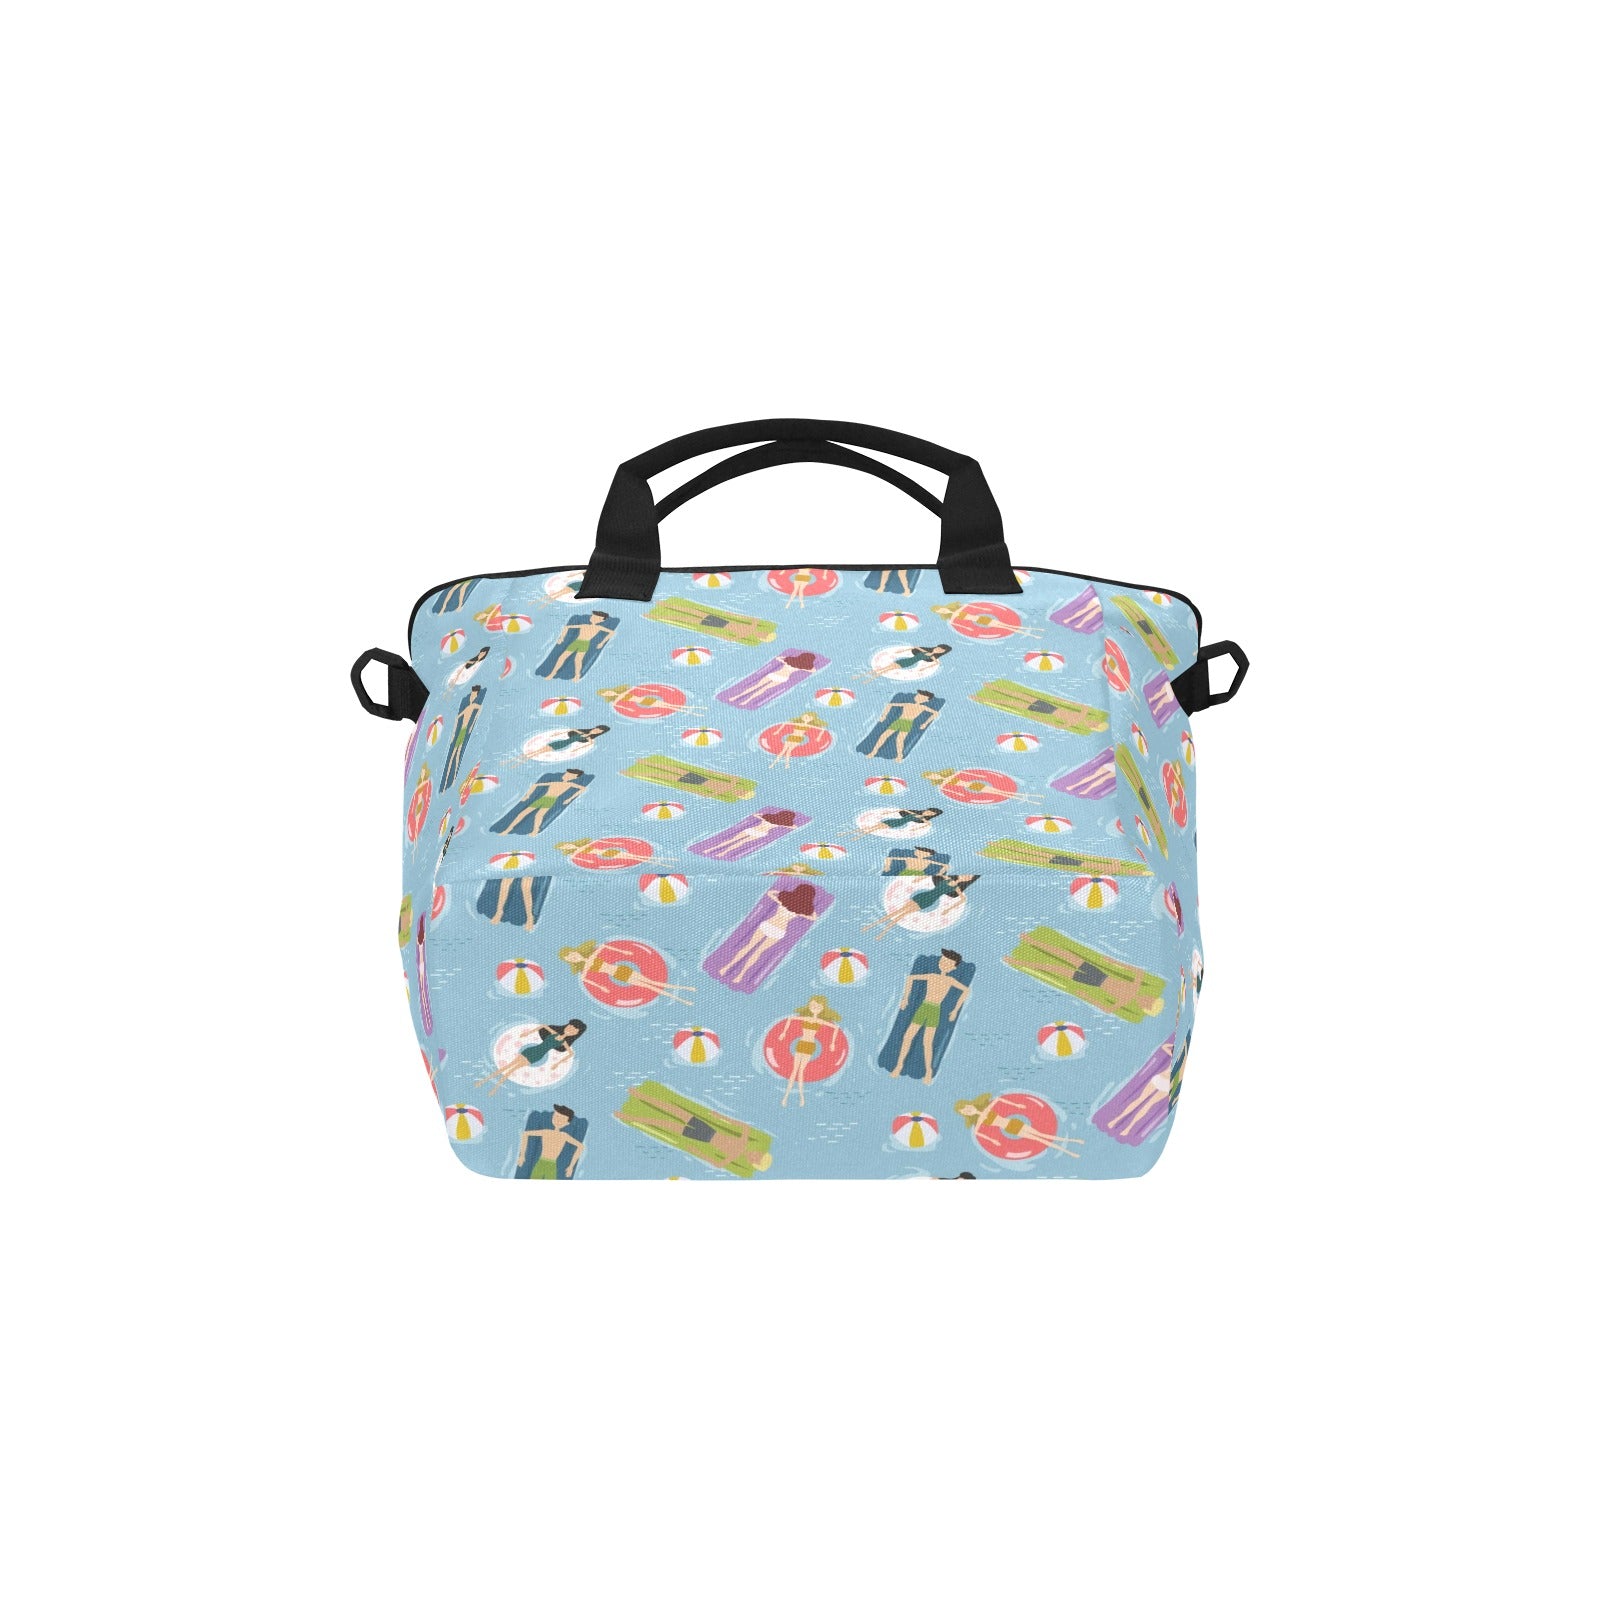 Beach Float - Tote Bag with Shoulder Strap Nylon Tote Bag